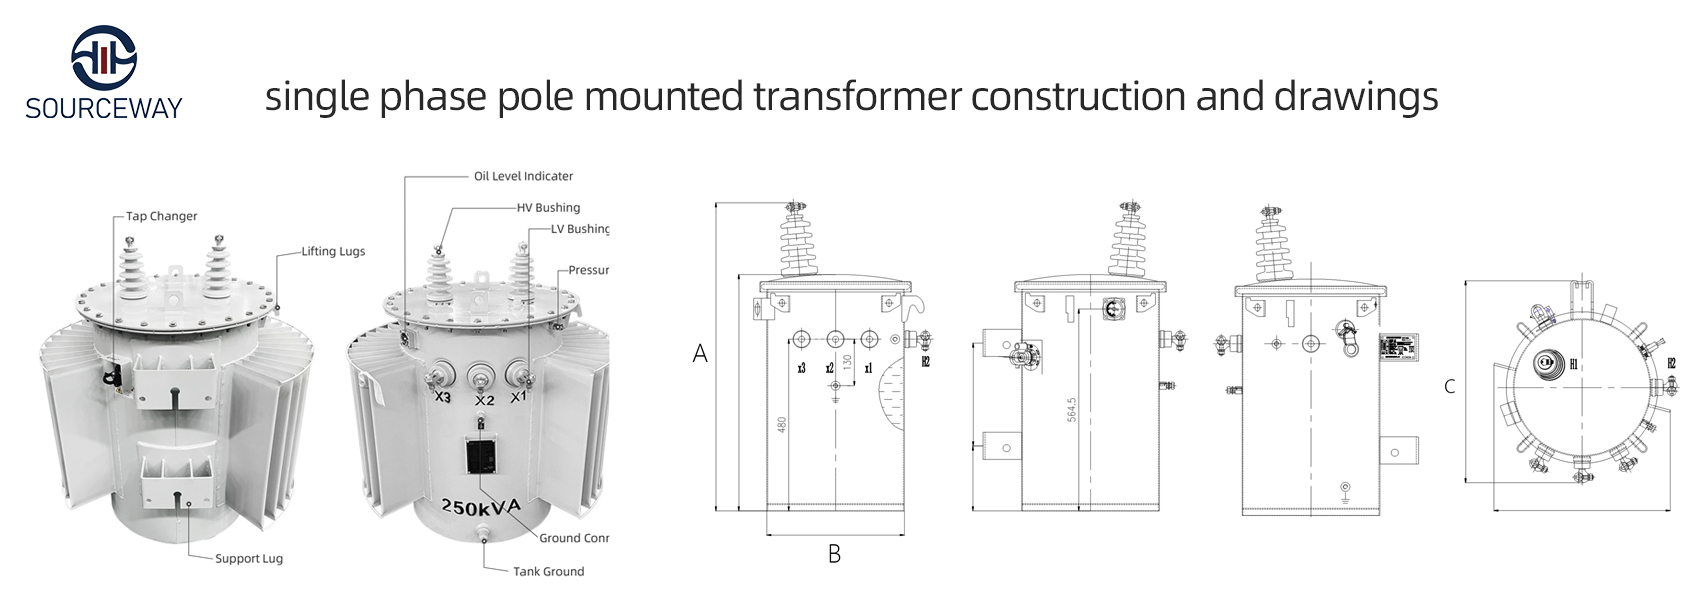 single phase pole mounted transformer construction and drawings